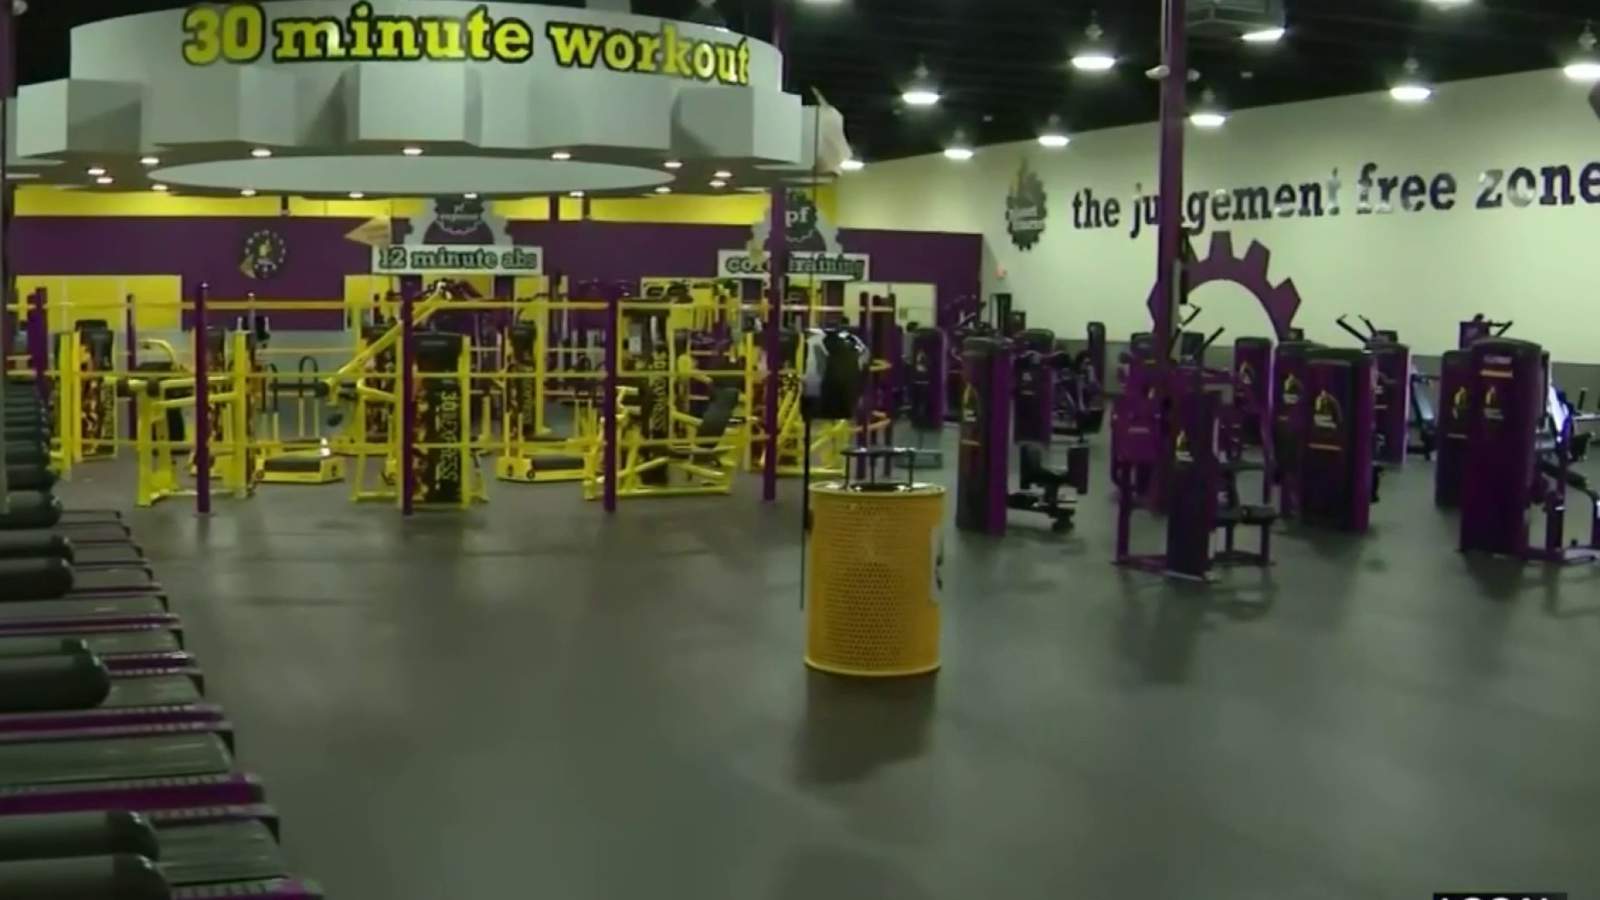 Update on reopening Michigan gyms, theaters expected today in Whitmer briefing